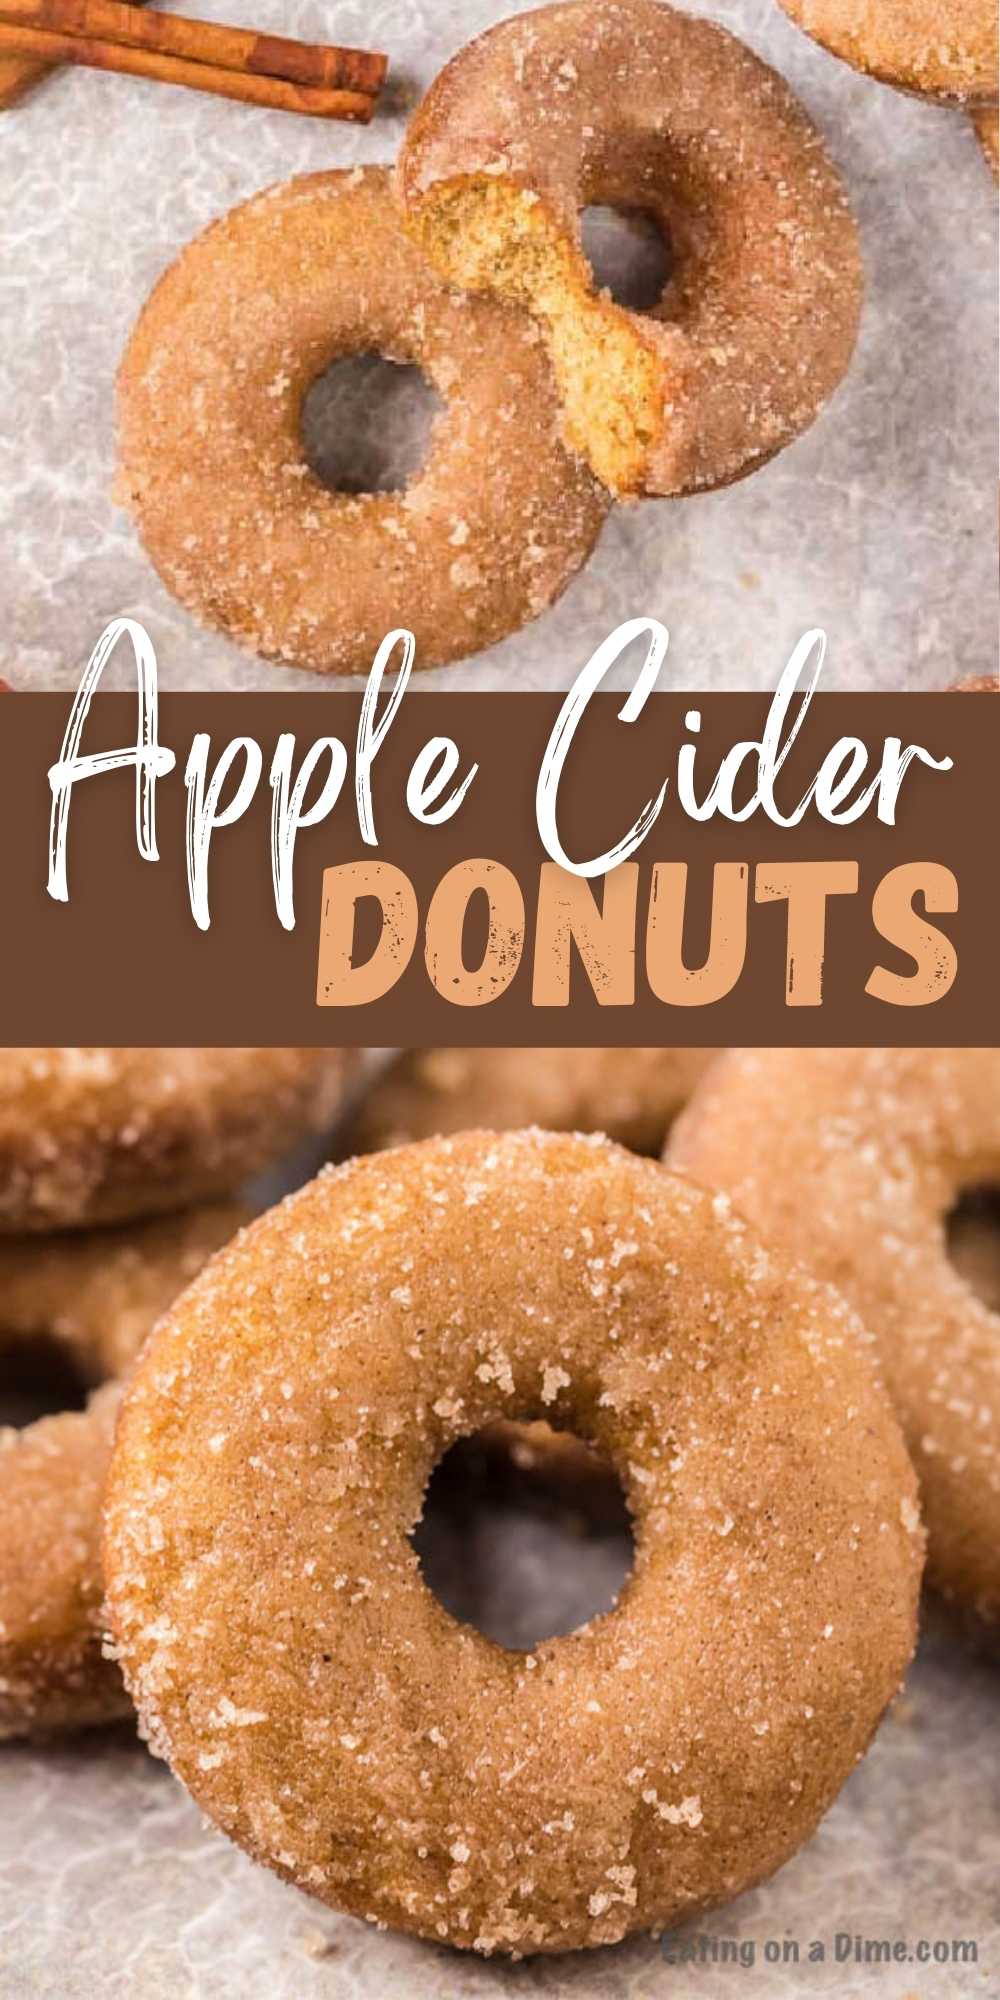 Try these easy and delicious Apple Cider Donuts! While these doughnuts are baked using a donut pan, they can easily be made into doughnut holes by using a mini muffin pan. These apple cider baked donuts are easy to make and tastes amazing too!  #eatingonadime #donutrecipes #appleciderrecipes #fallrecipes #easydonuts 